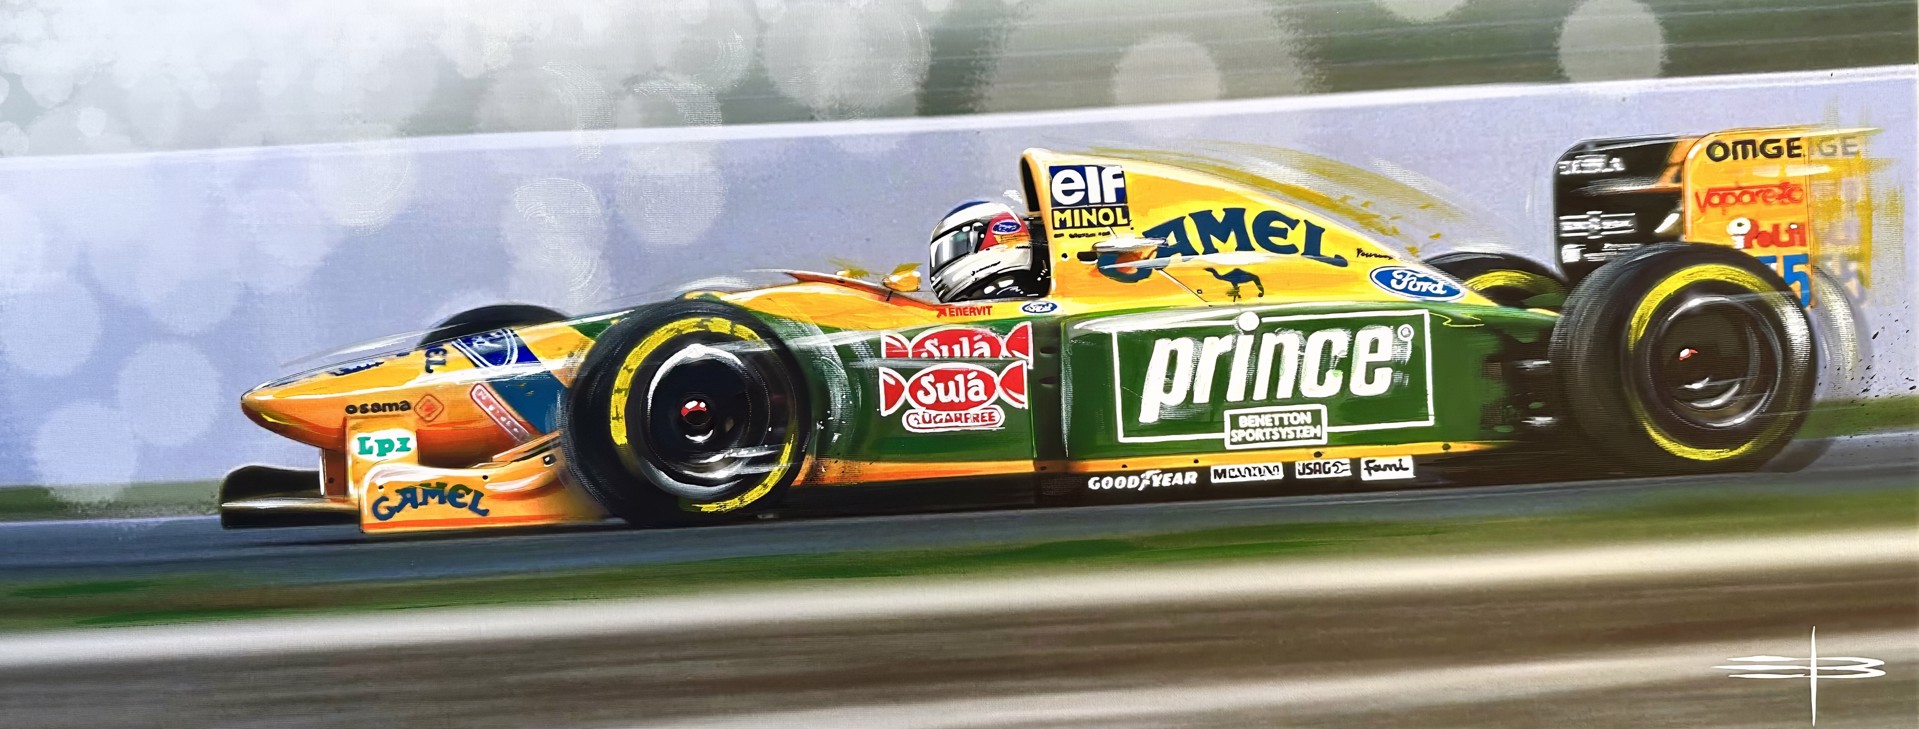 "Champion in Waiting" Benetton - Ford B193 by Emile Bouret